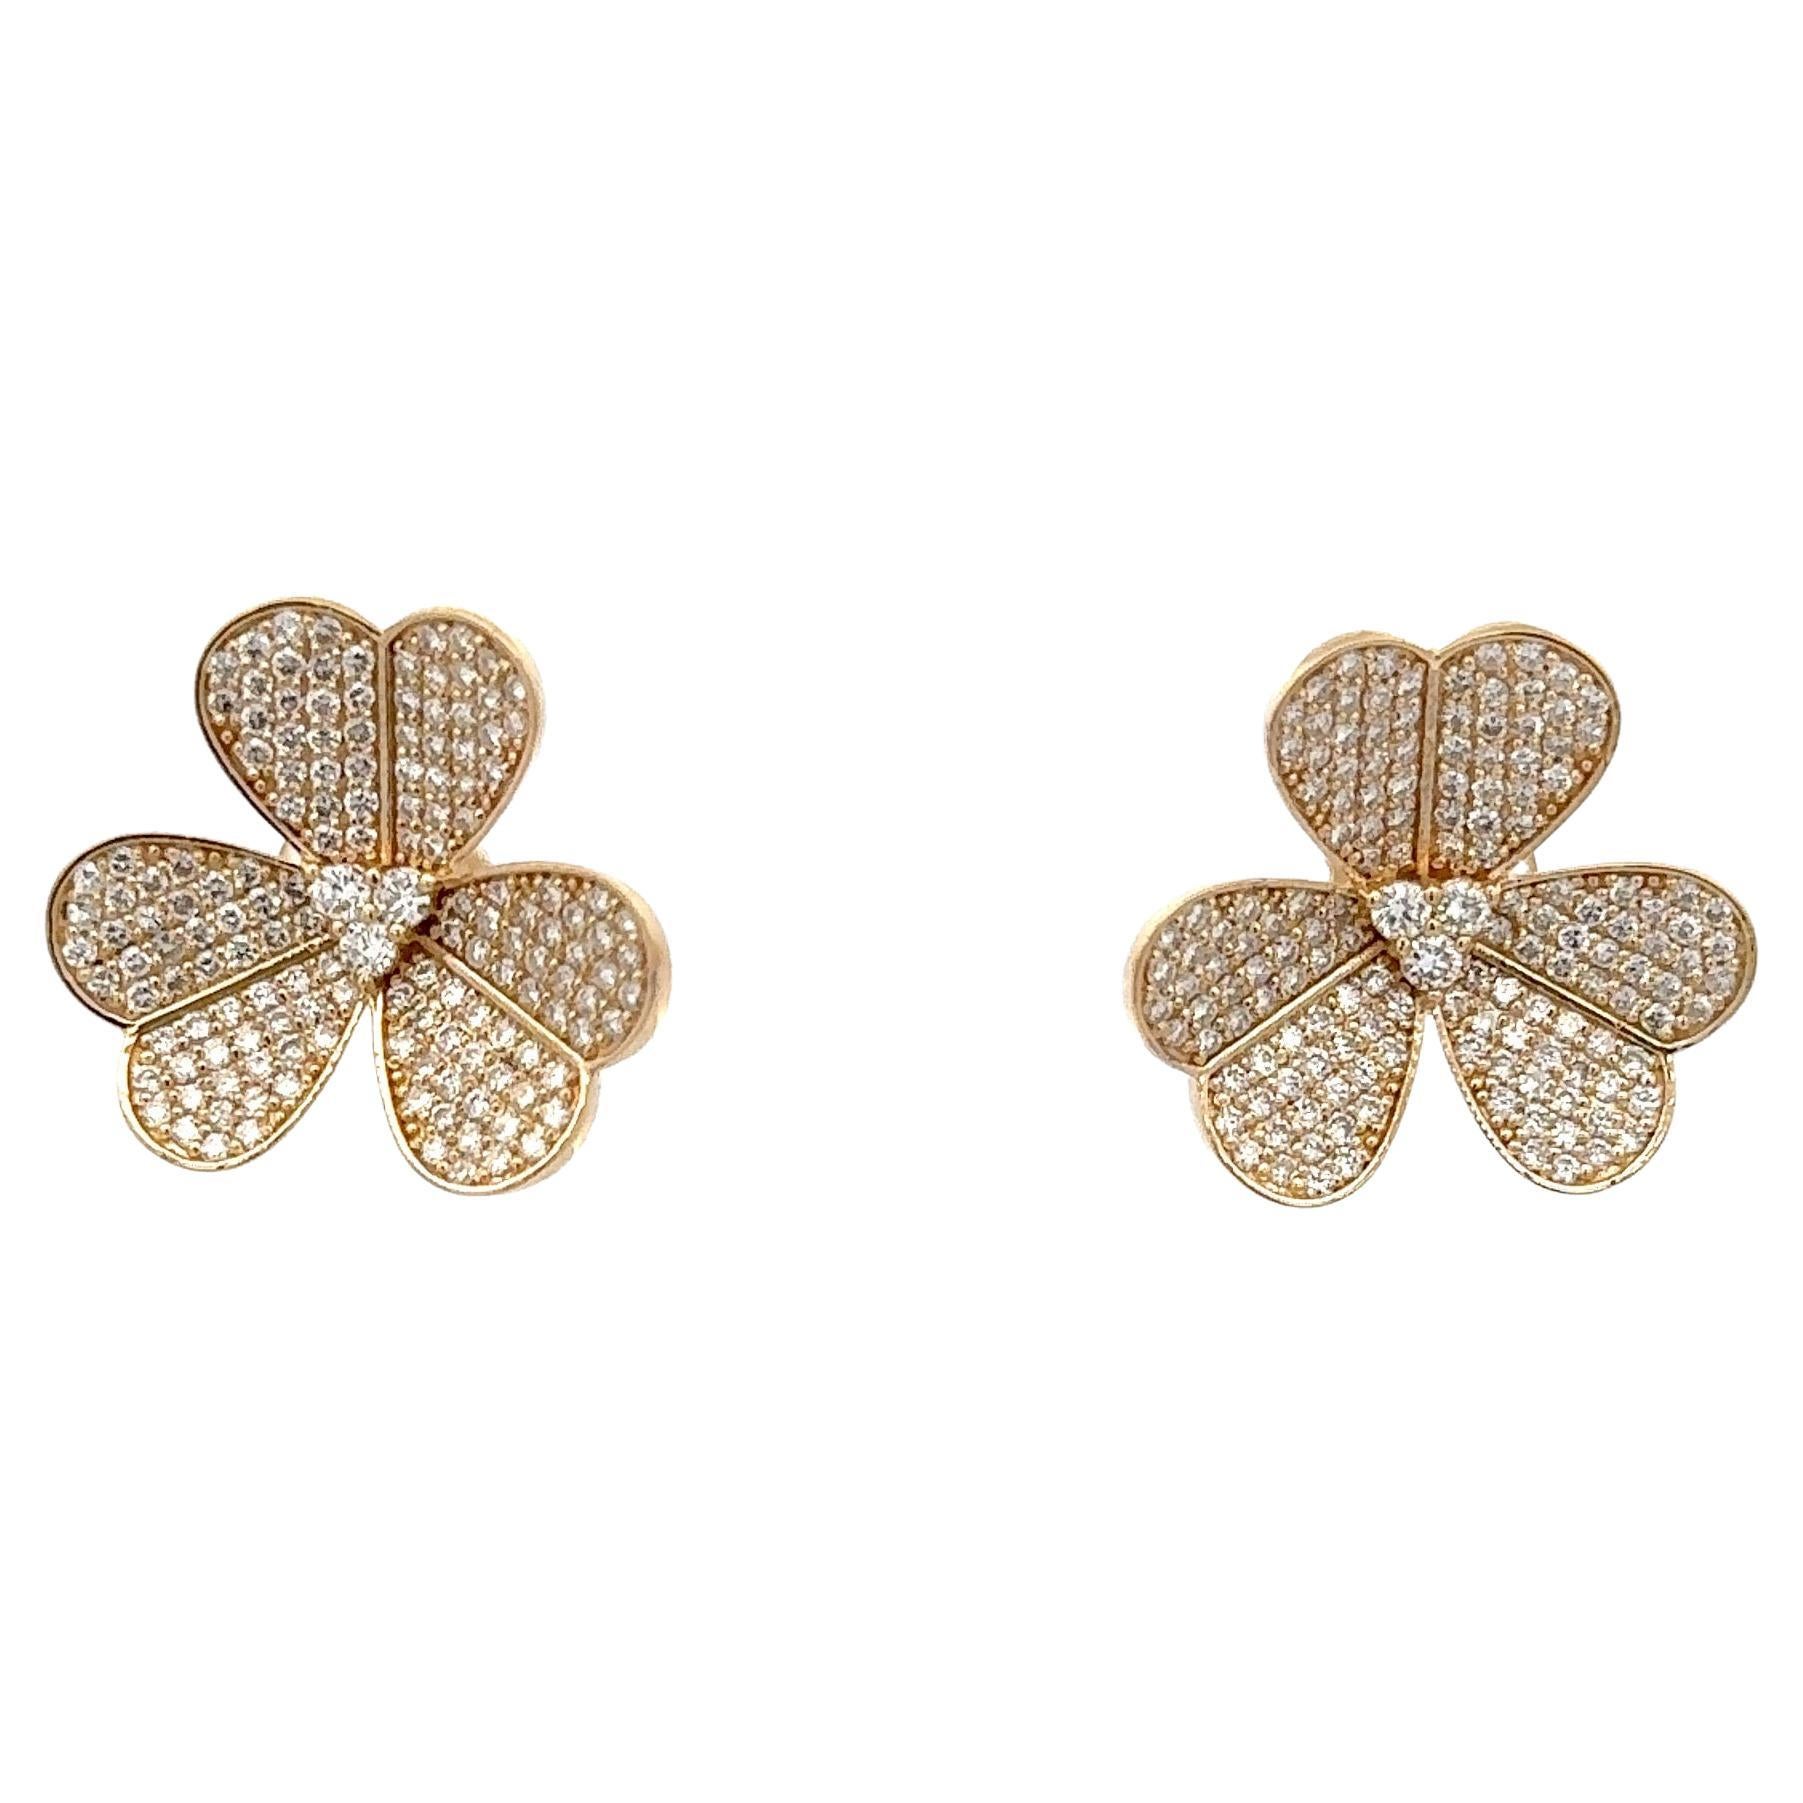 Large Floral Diamond Stud Earrings 2.02 Carats 14 Karat Yellow Gold F VS For Sale